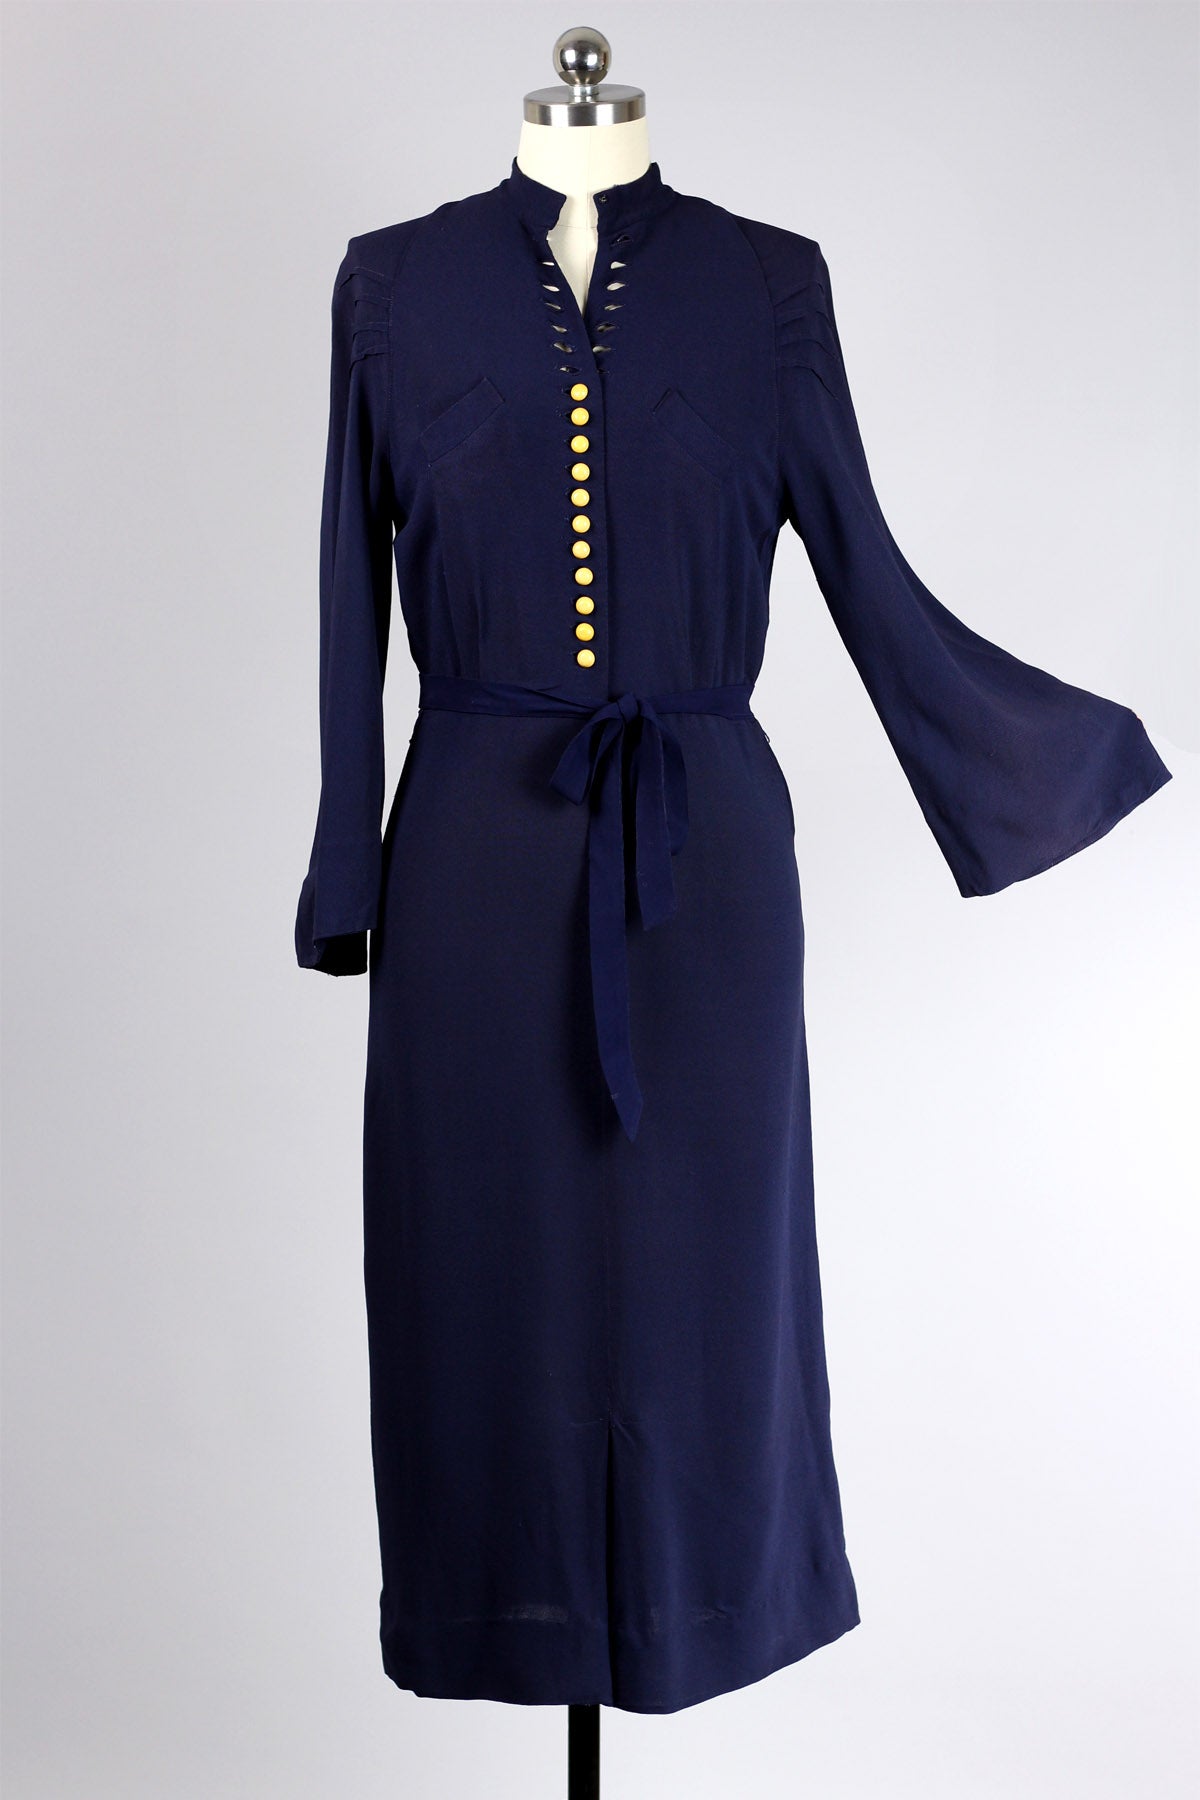 Rare 1930s-40s Navy Crepe Dress with Yellow Bakelite Buttons